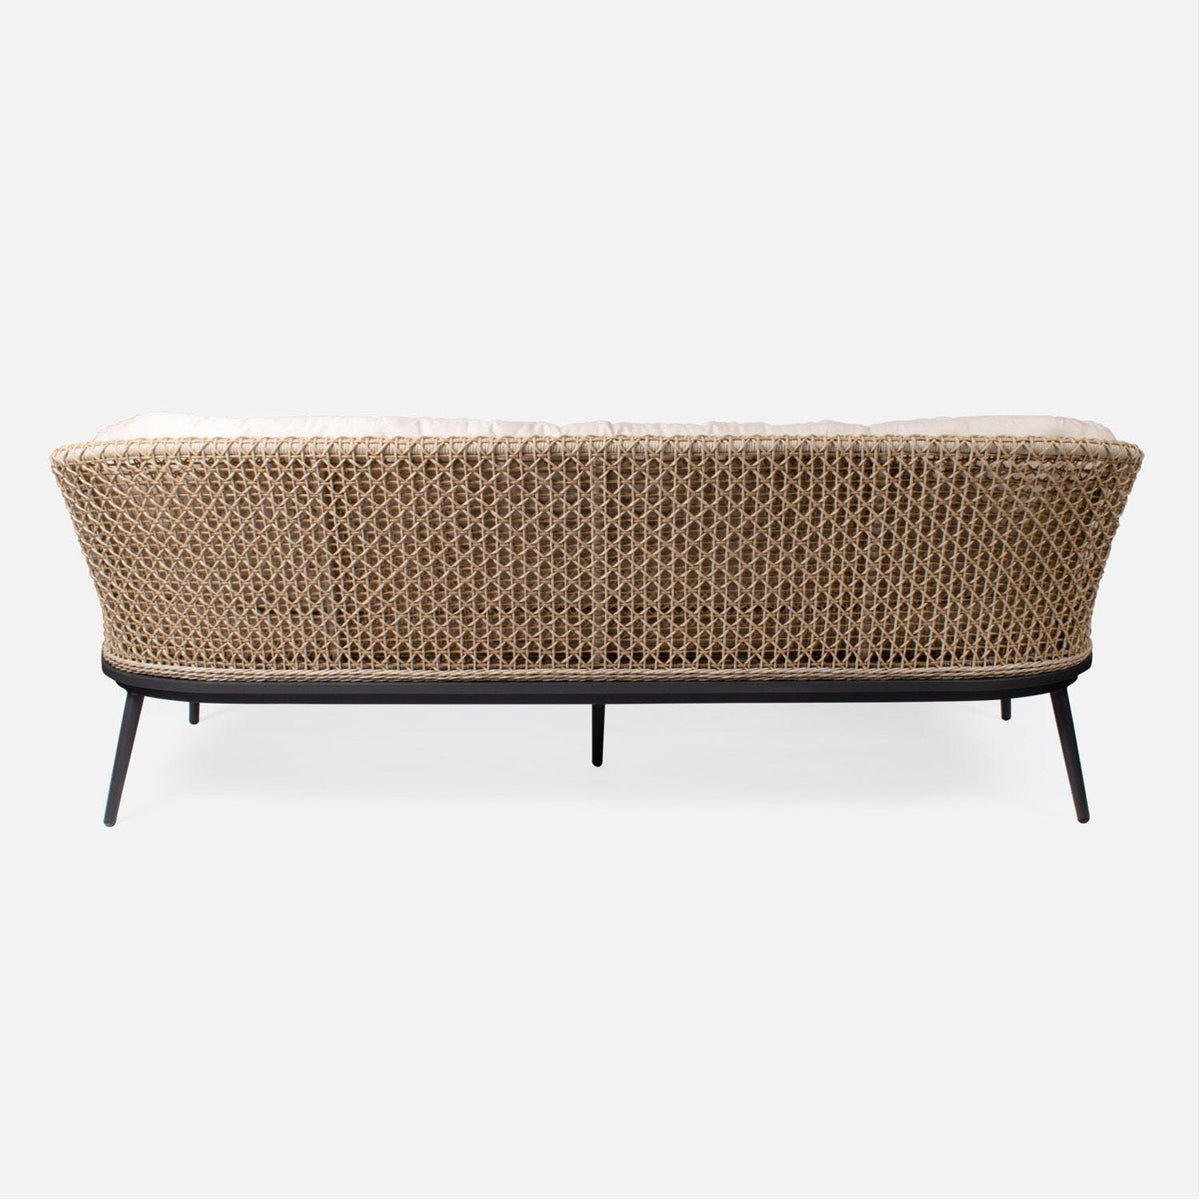 Made Goods Leandre Barrel Woven Outdoor Sofa in Danube Fabric